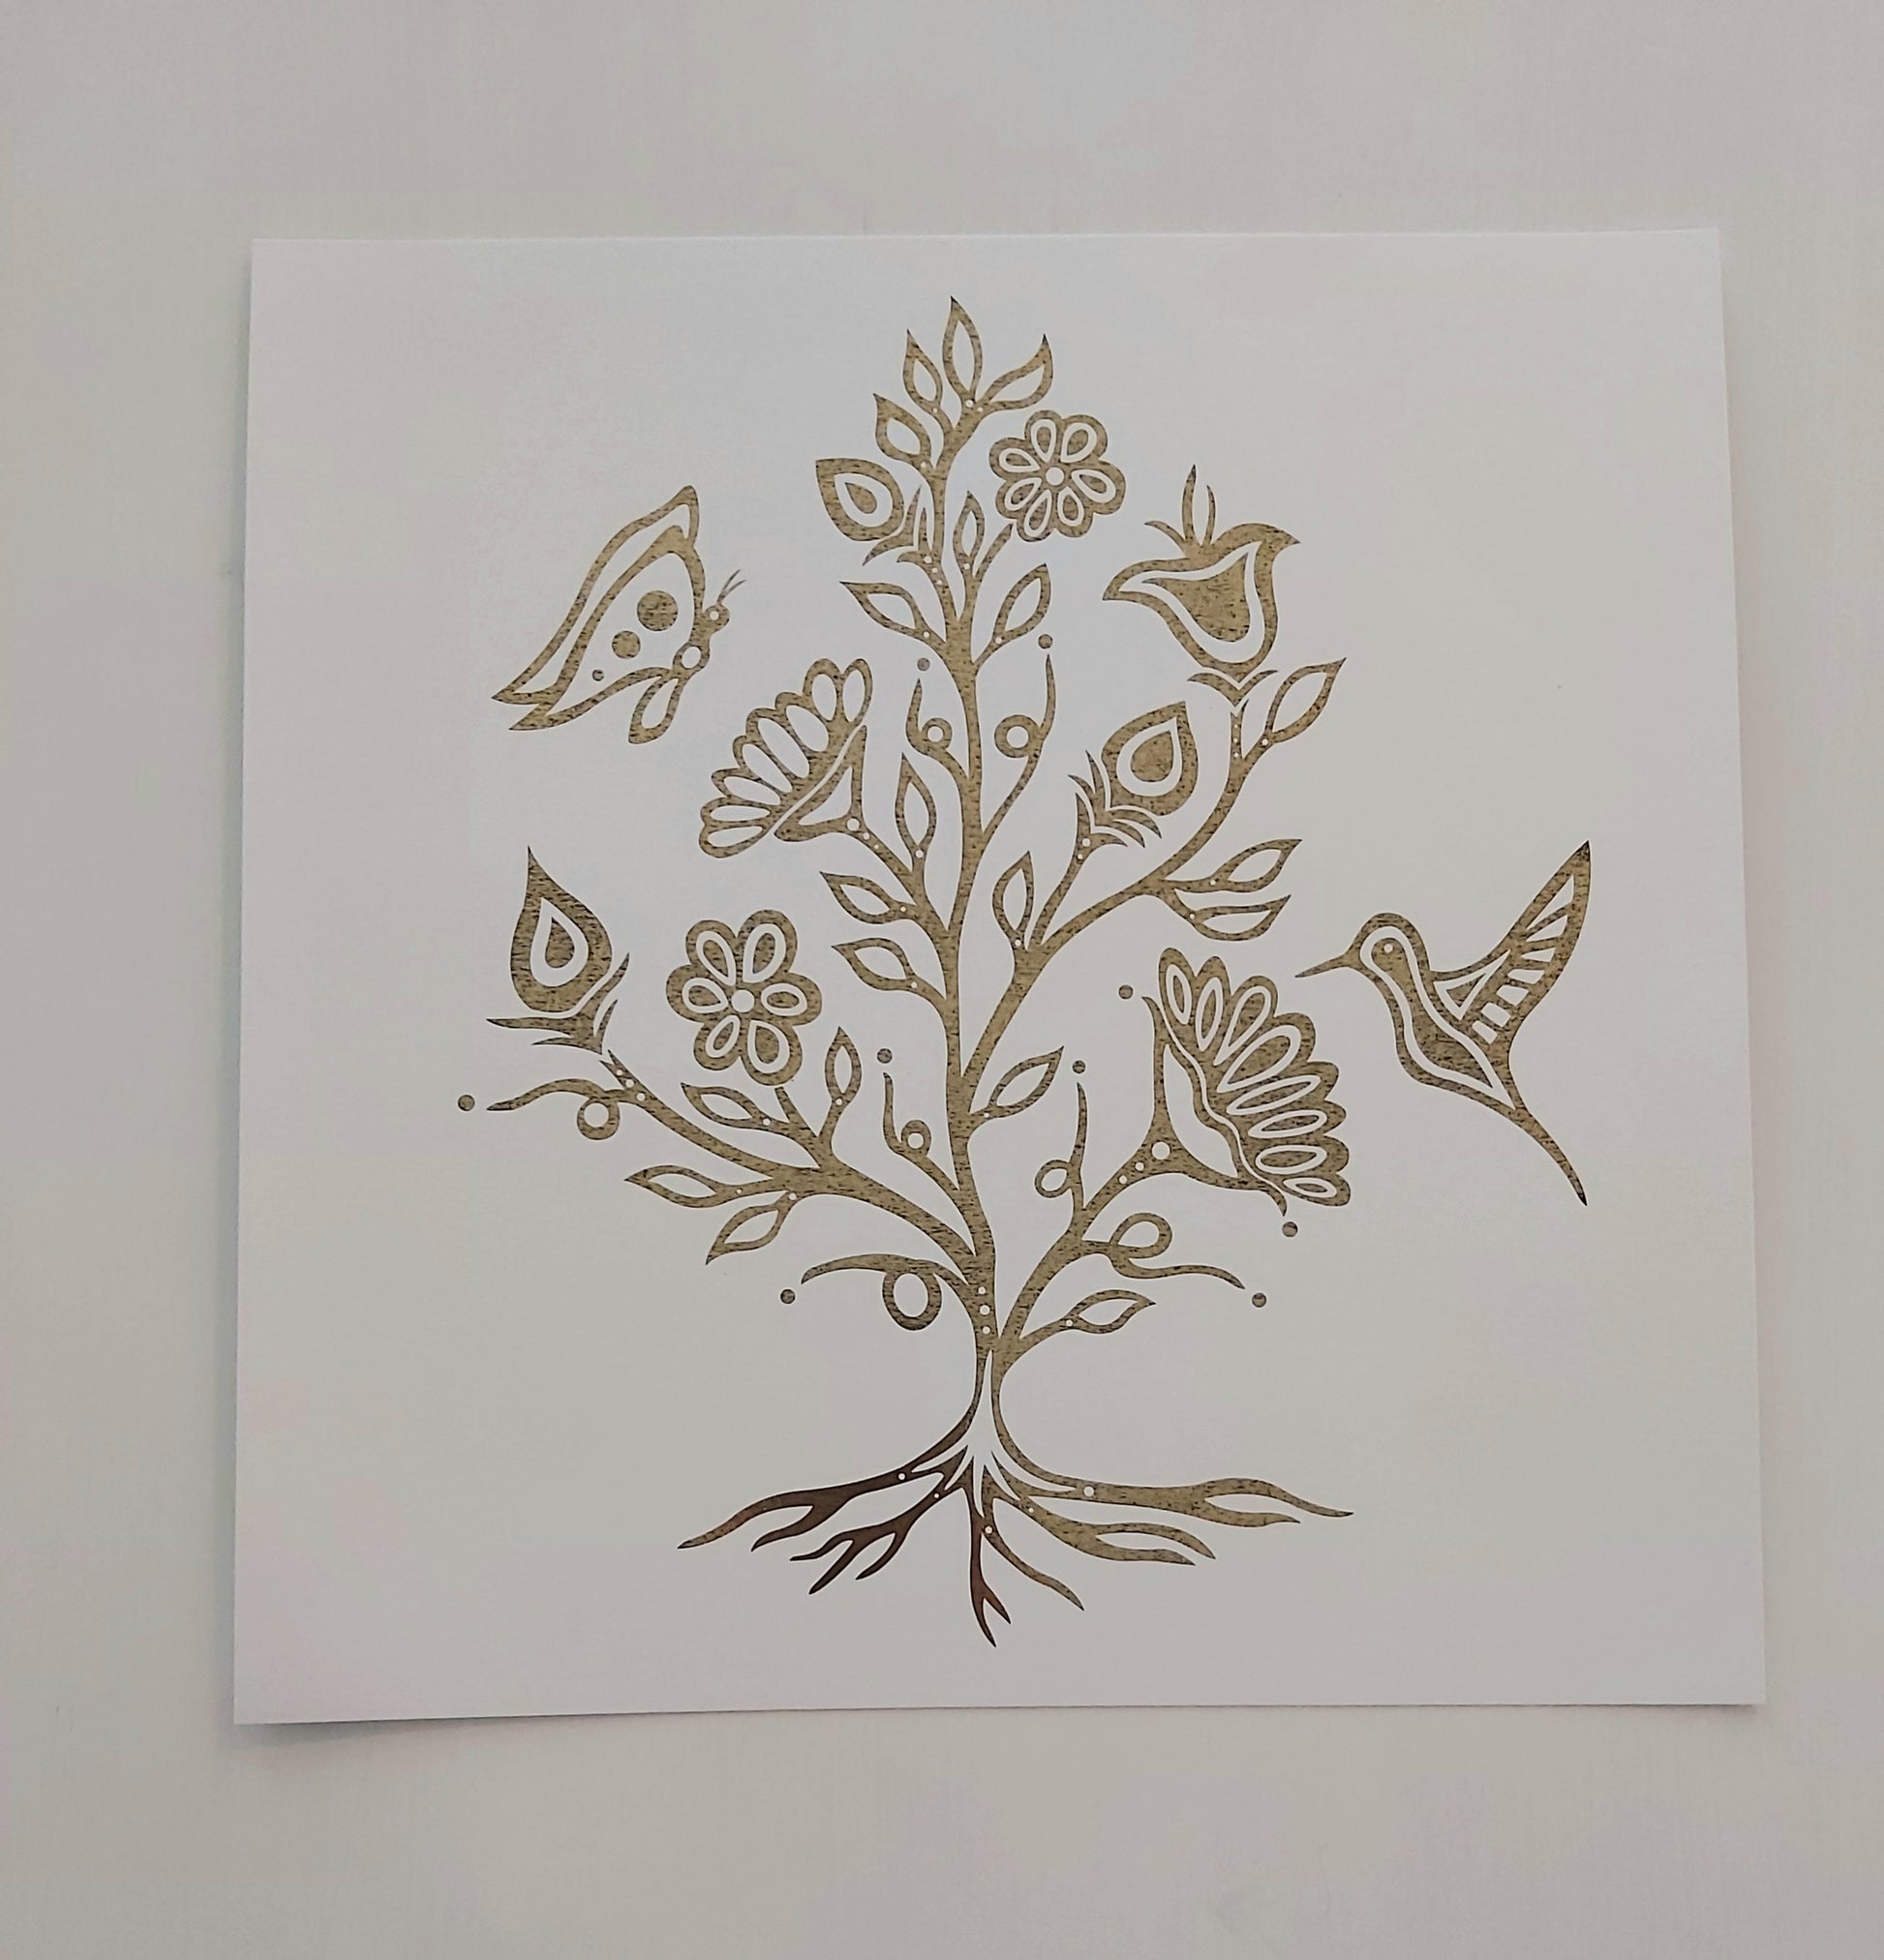 Print of Patrick Hunter's painting of flowers and polinators in gold leaf on white background, woodland art style.